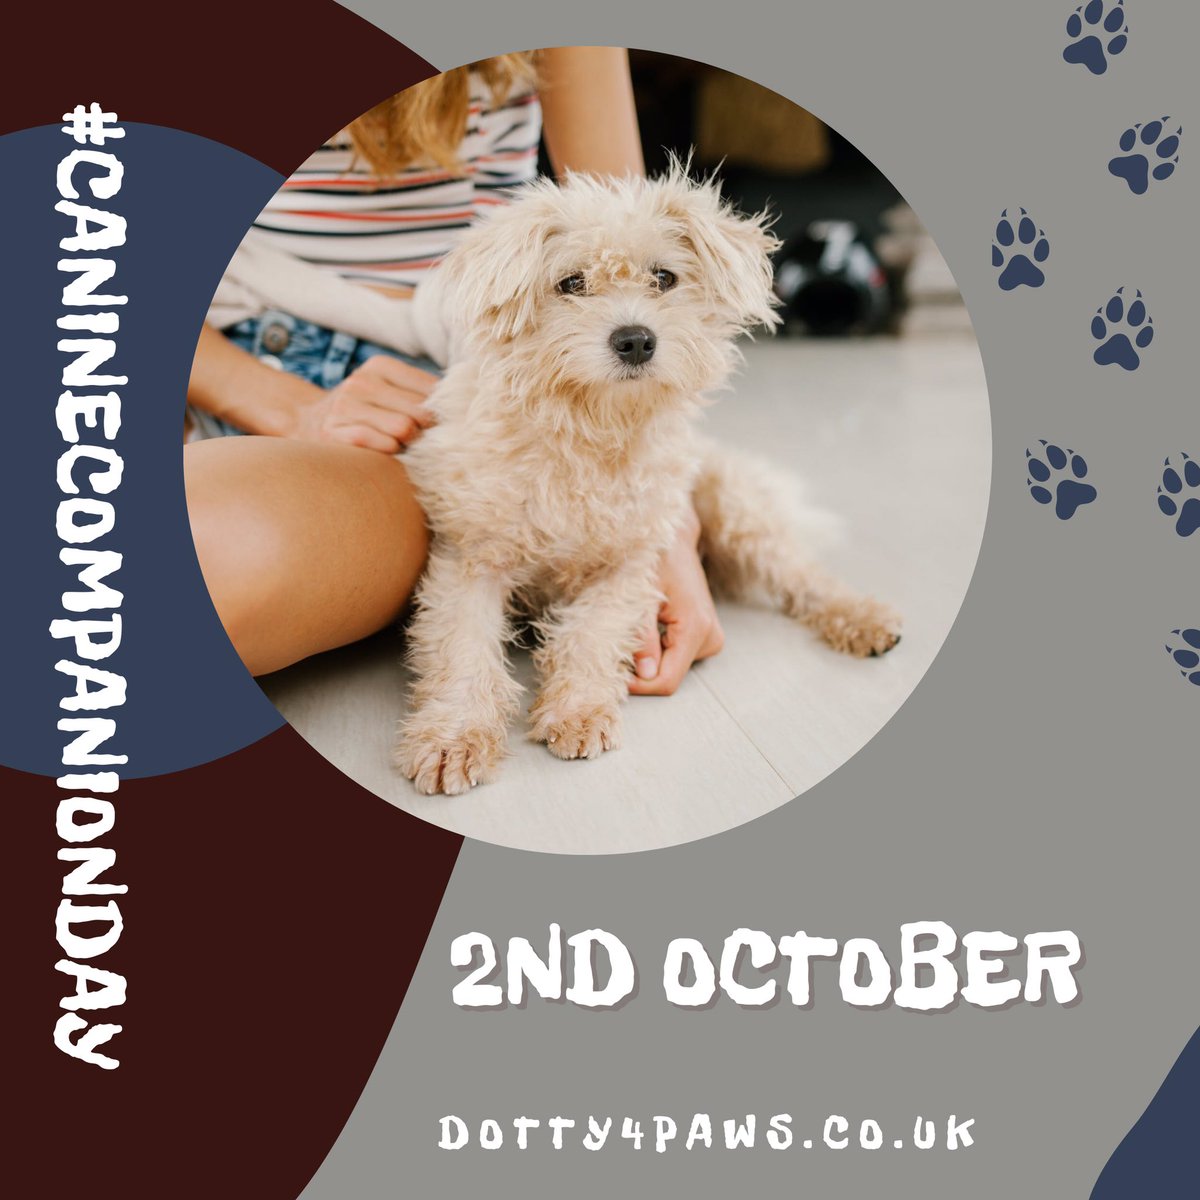 Eeeeek! It’s finally here! #caninecompanionday 🎉🐶 A whole day dedicated to our finest furry friends 🥳 Share a pic of you & your canine companion using the hashtag #caninecompanionday Let’s get our pups trending! #dogs #dogsoftwitter